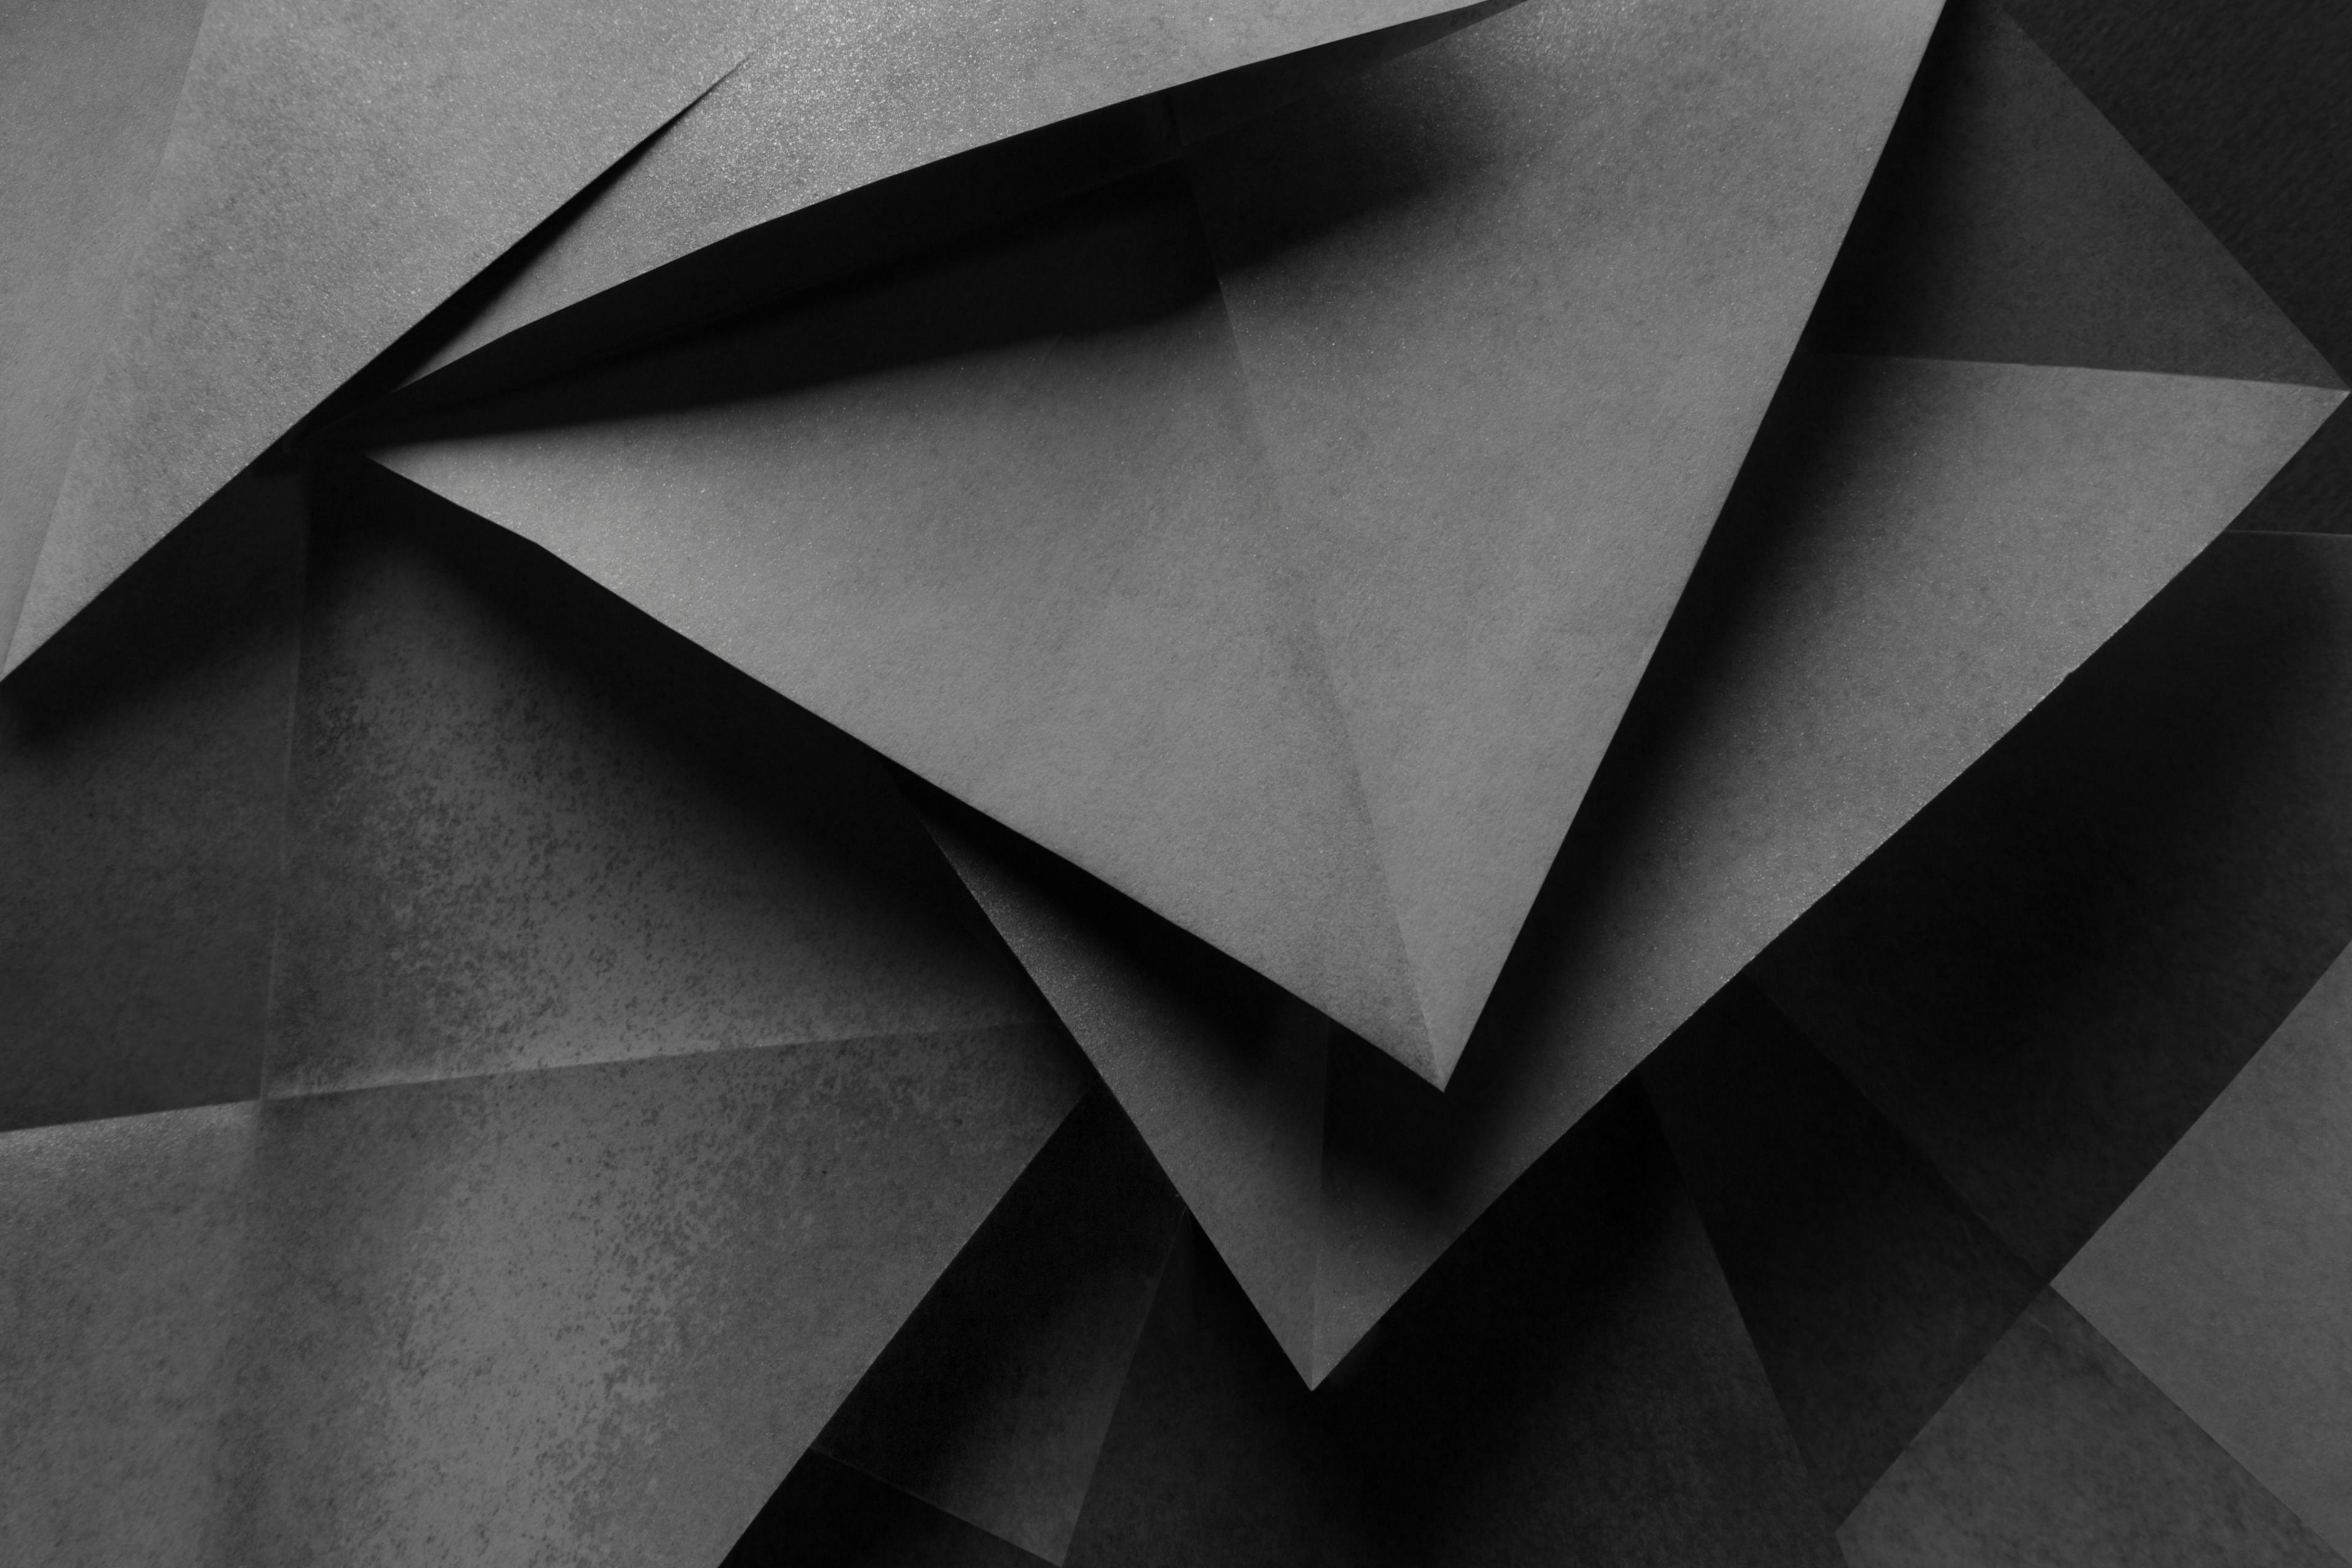 Geometric shapes made gray paper, abstract background | Image Credit: © Allusioni - stock.adobe.com.